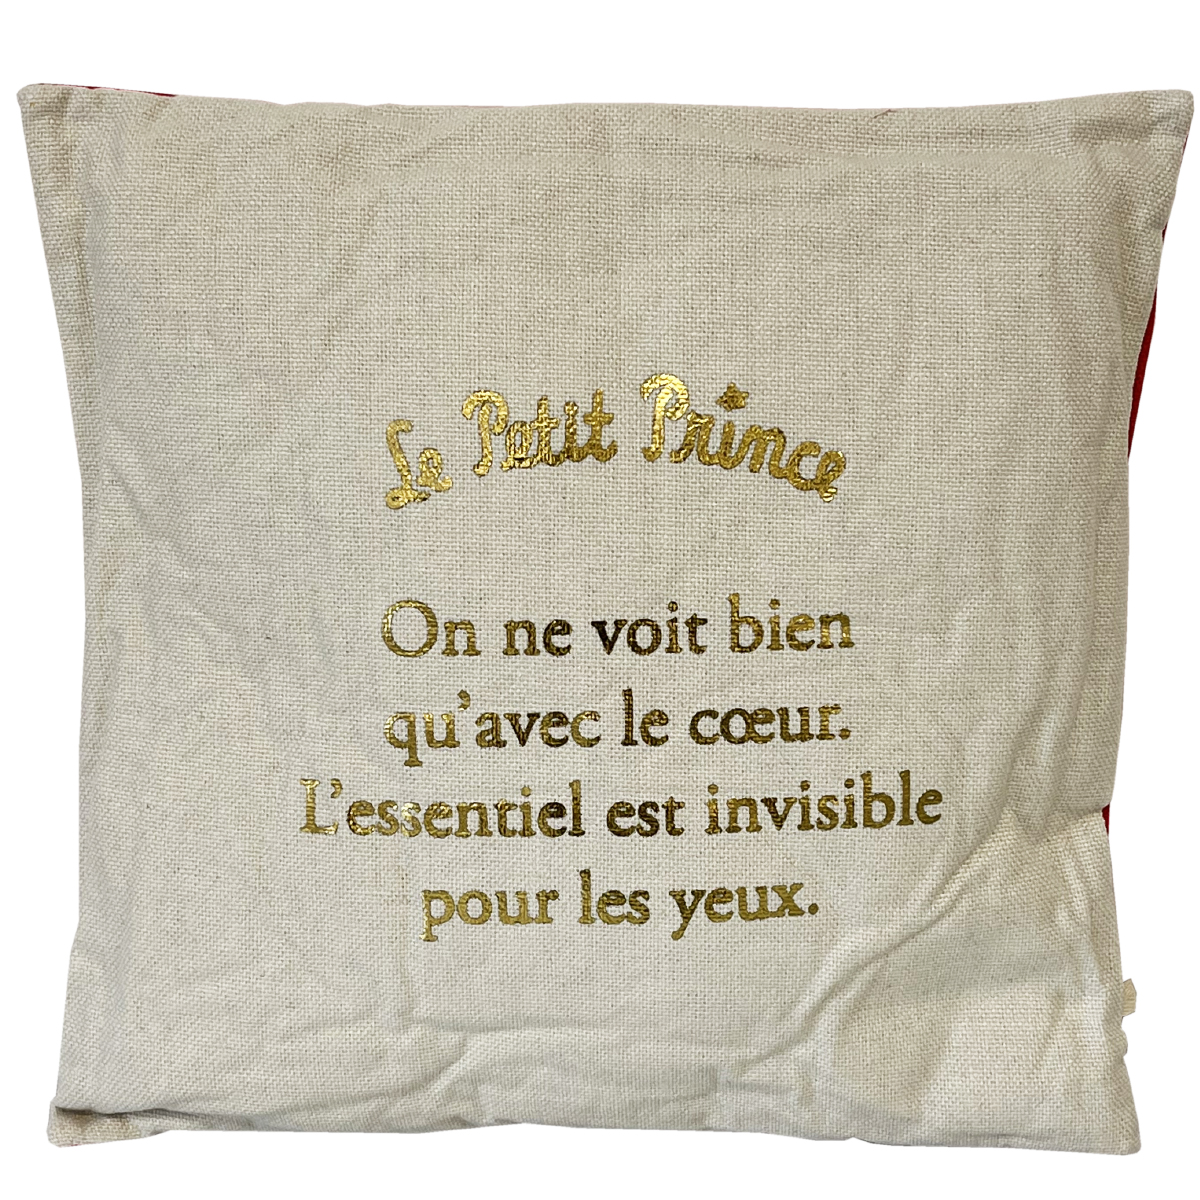 Cushion The little prince beige and red 40 cm